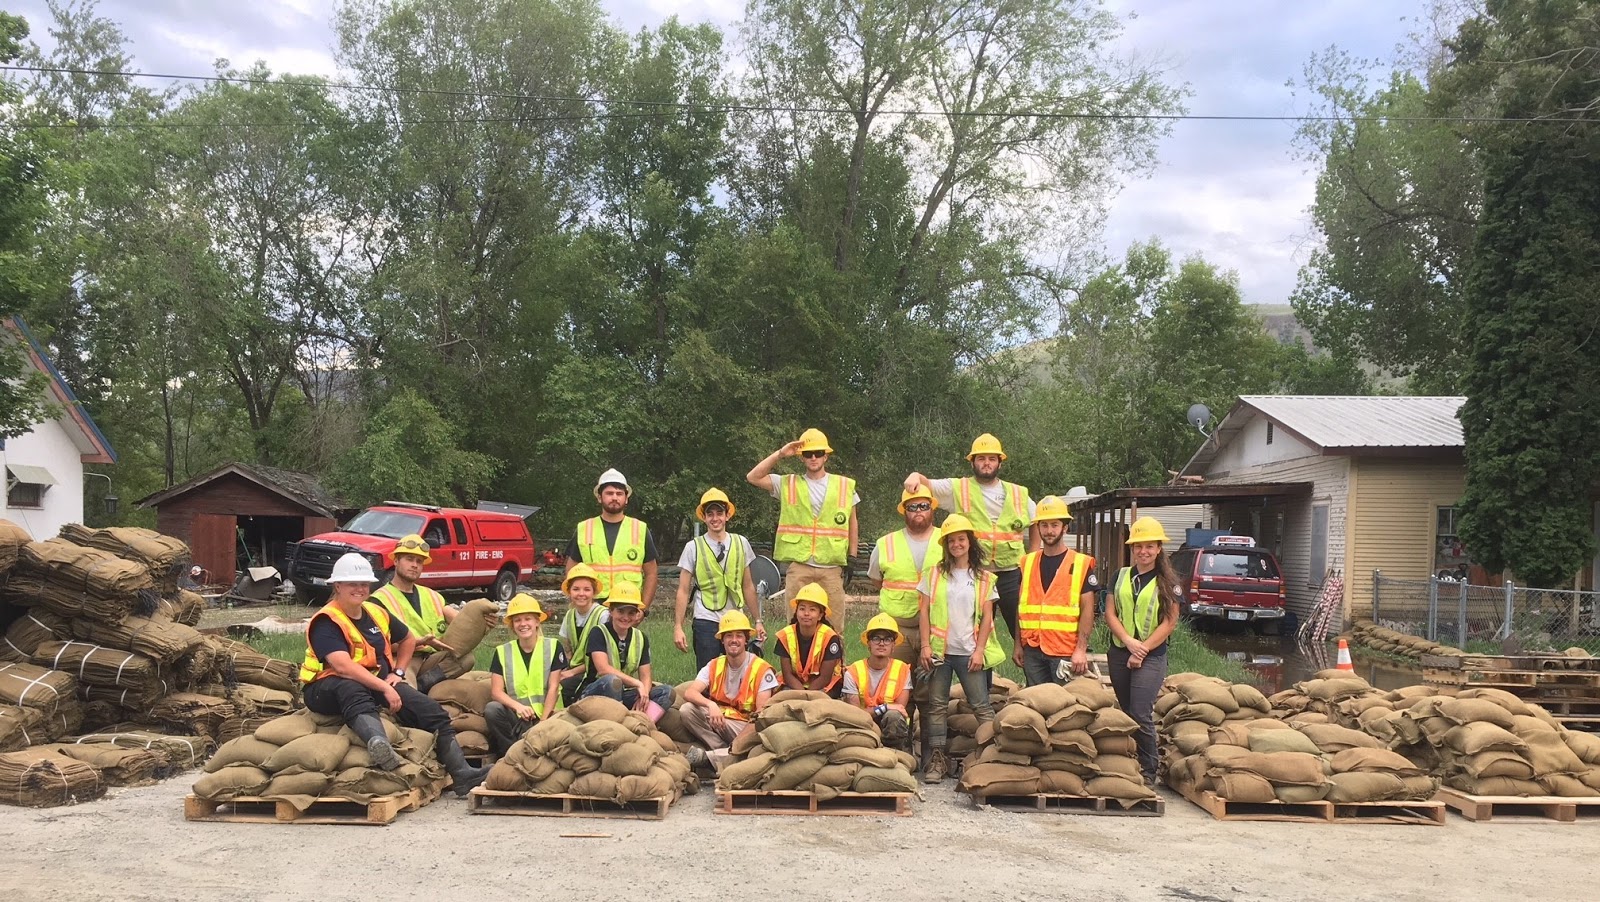 Over 15 WCC AmeriCorps members sit and stand near multiple pallets full of sandbags they filled.